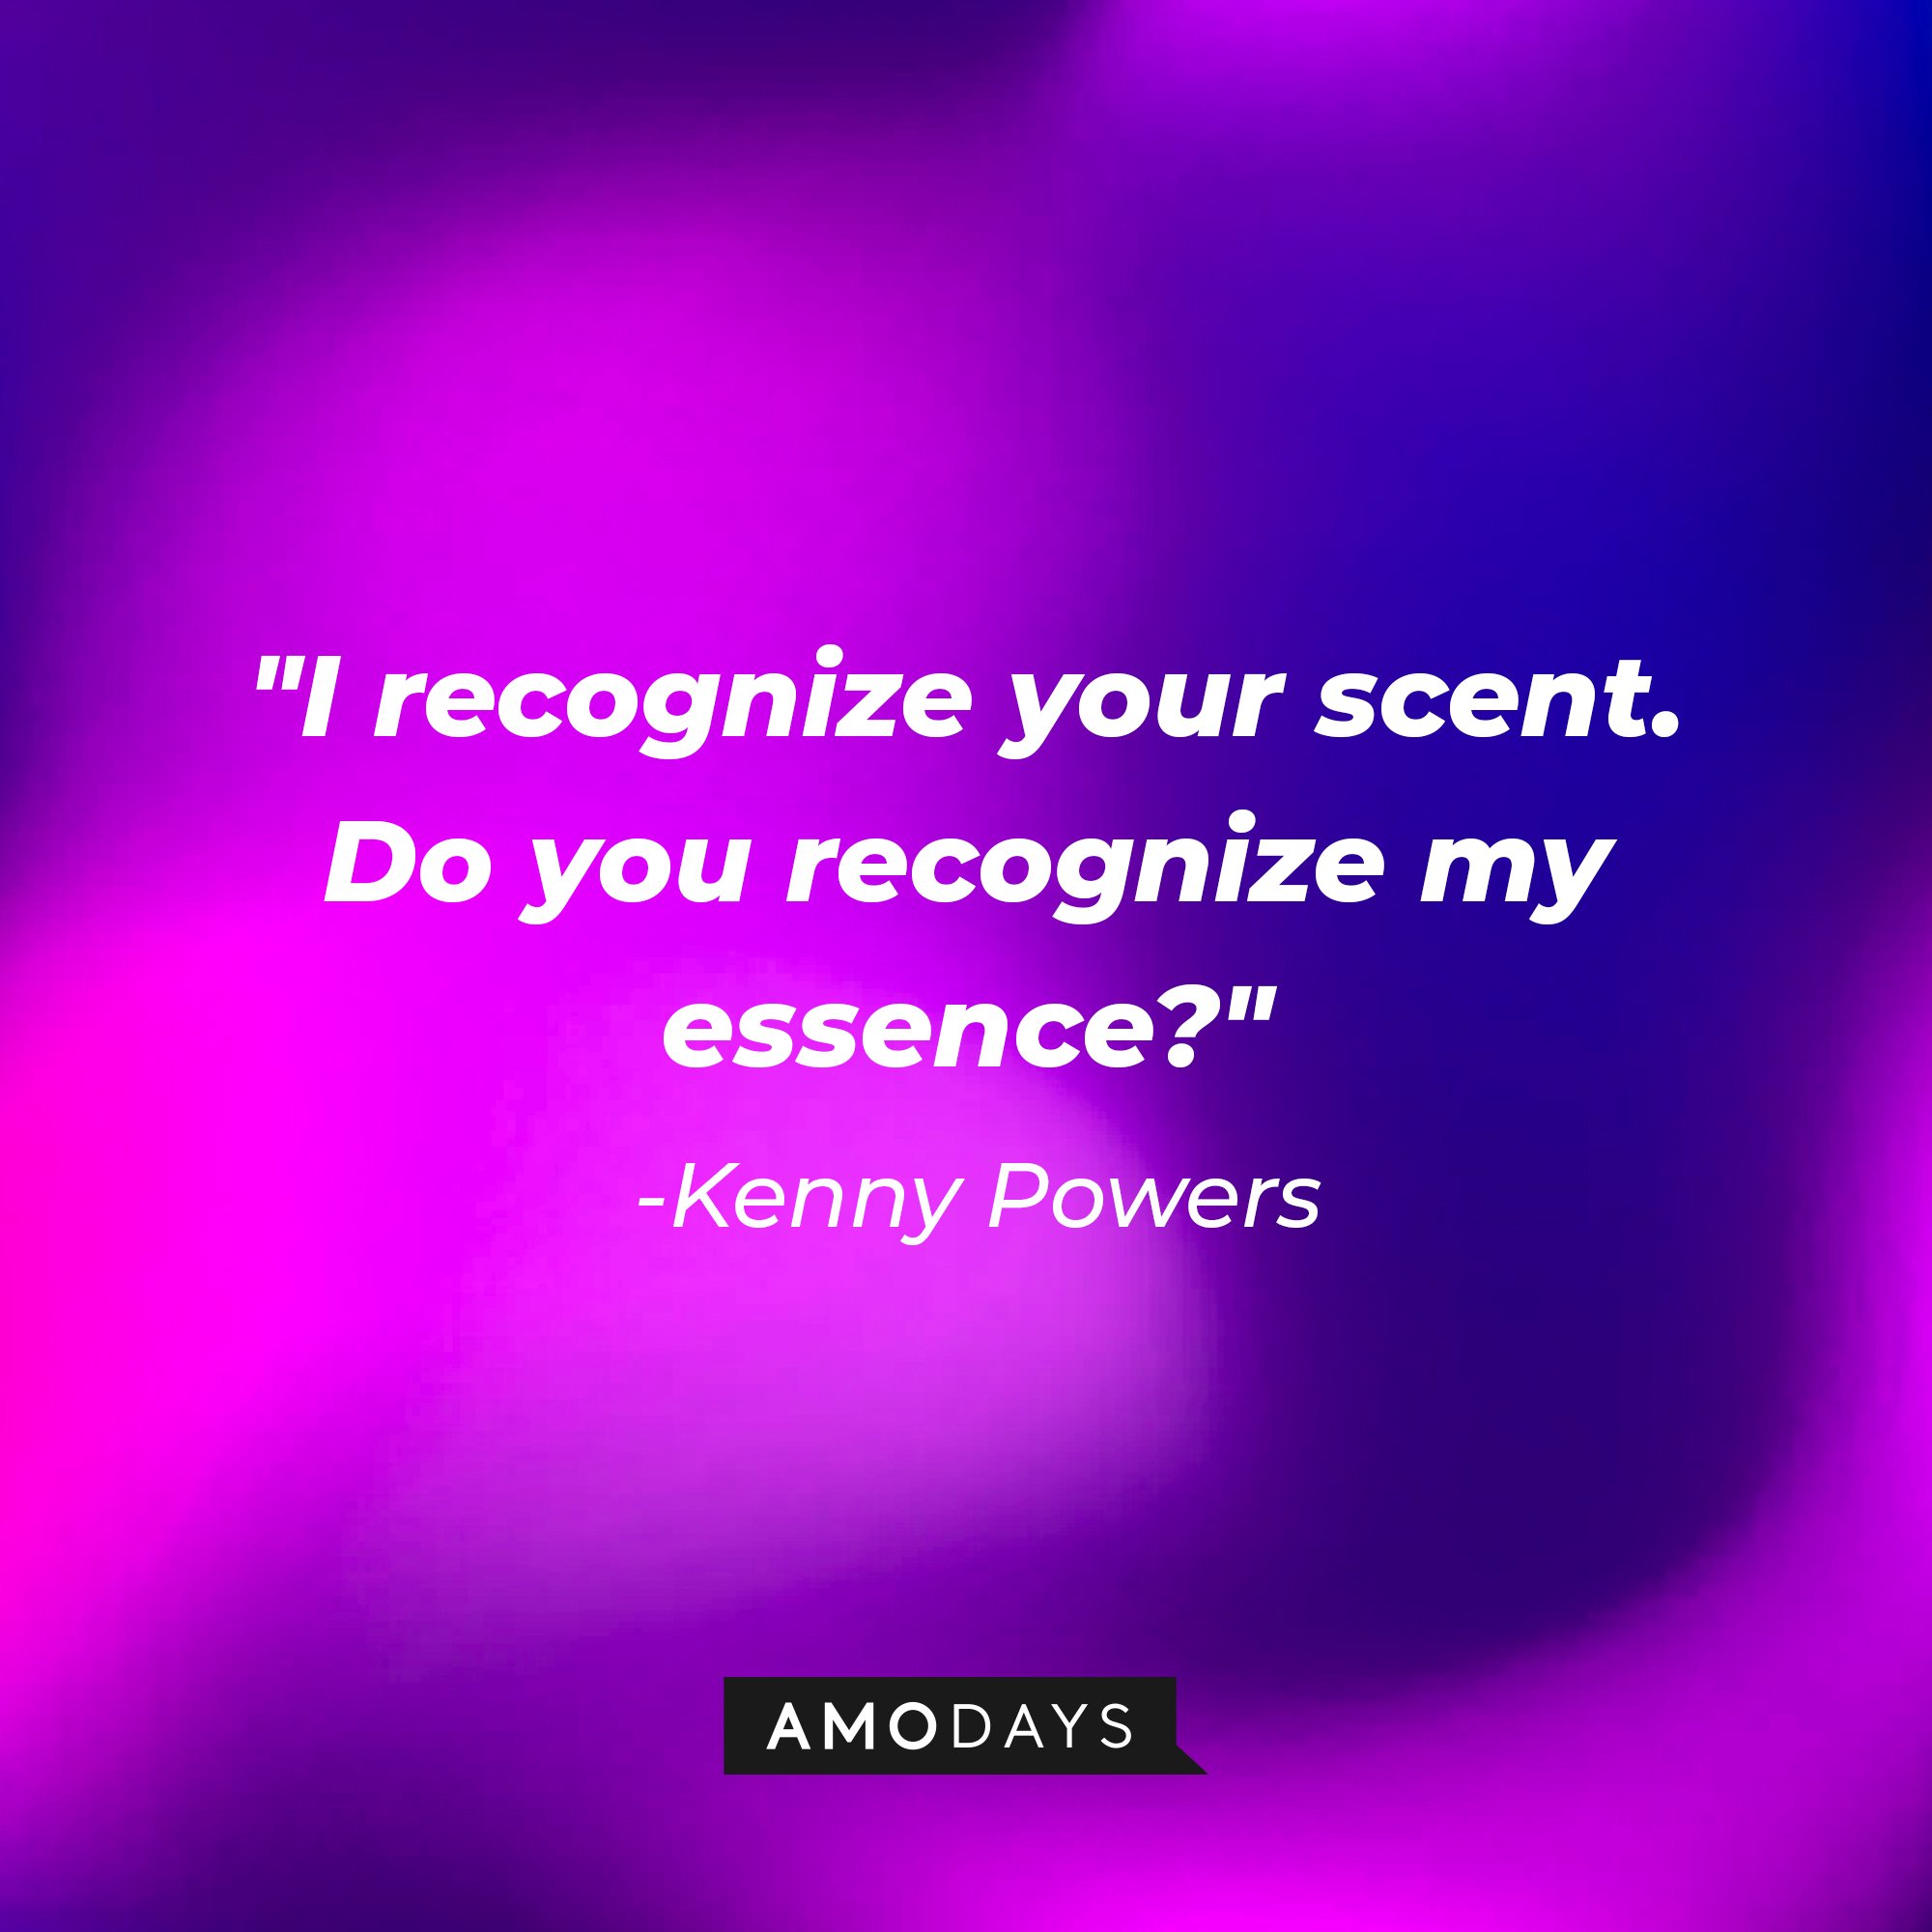 Kenny Powers' quote: "I recognize your scent. Do you recognize my essence?" | Image: AmoDays